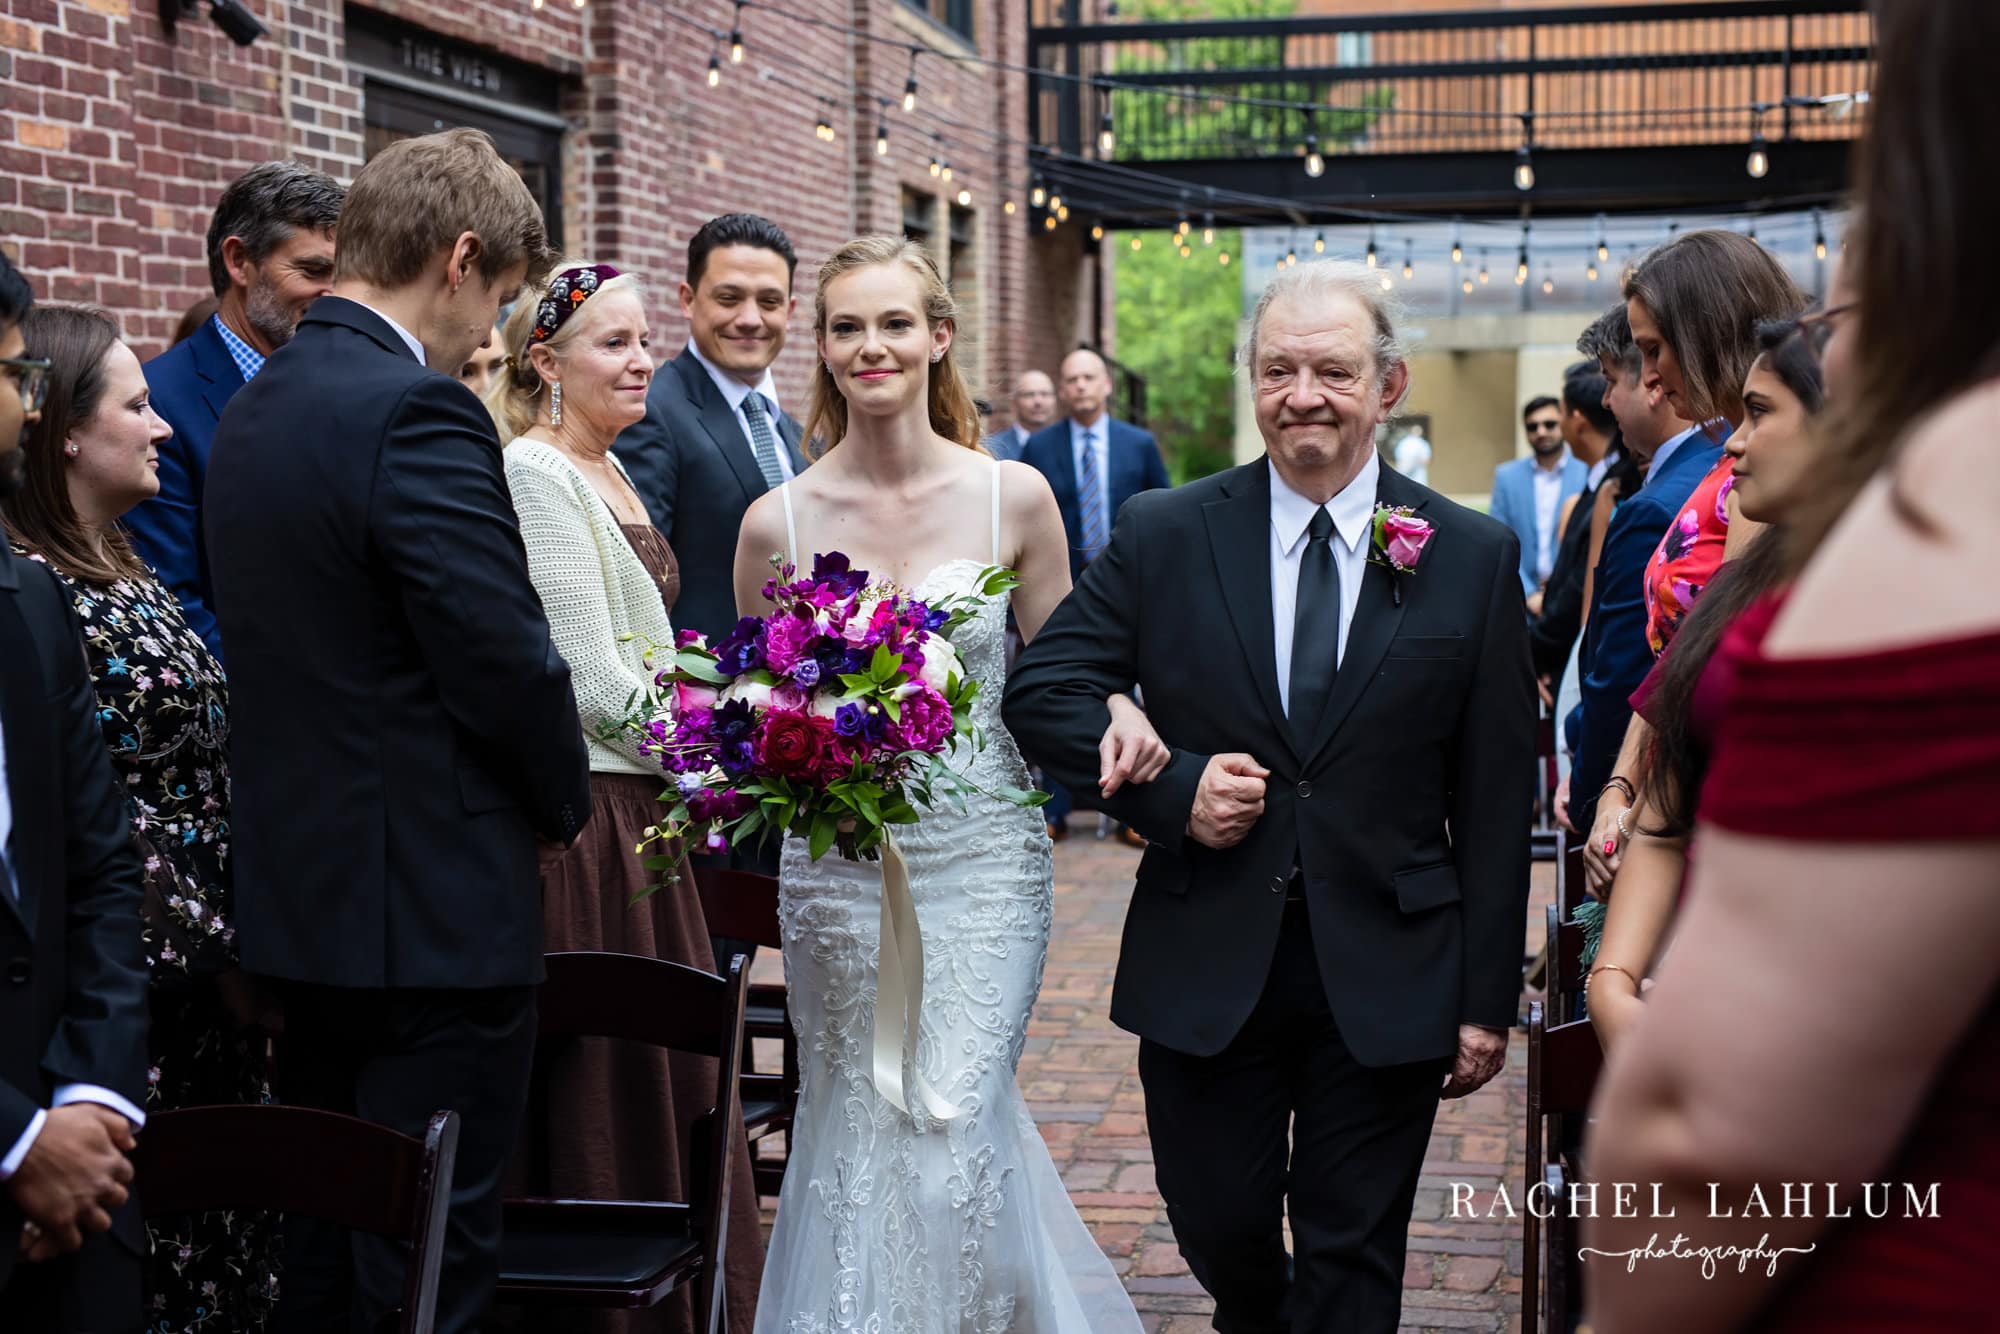 Bride walks down the aisle with her father during wedding at The Minneapolis Event Center.